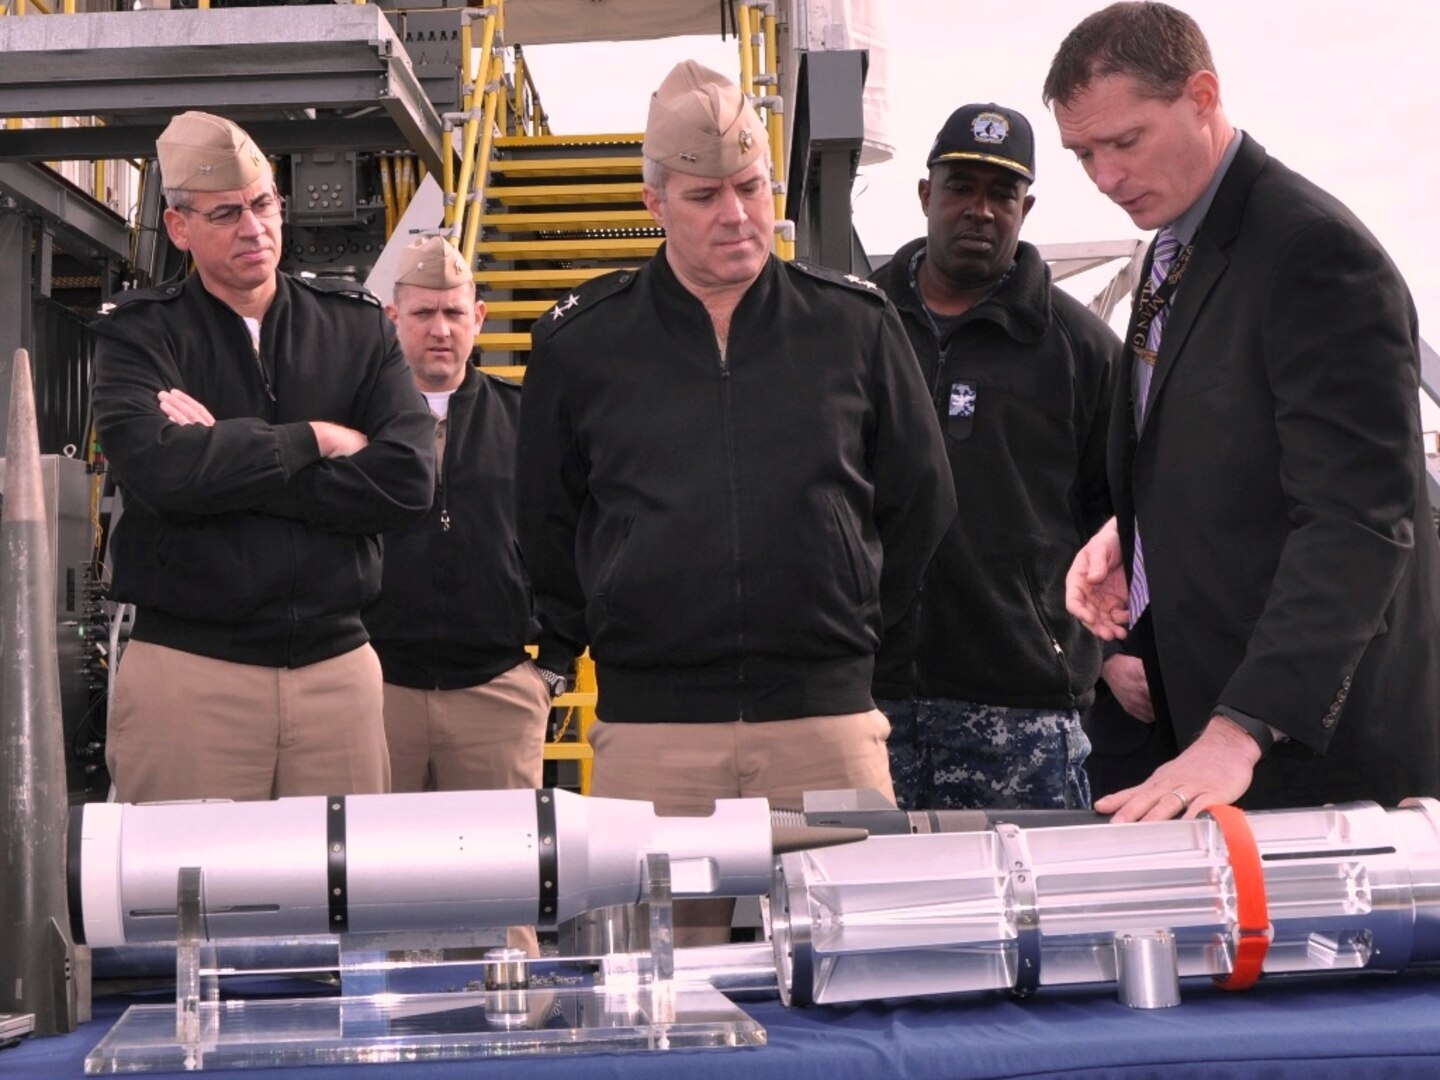 DAHLGREN, Va. - Adam Jones, a Naval Surface Warfare Center Dahlgren Division (NSWCDD) engineer, briefs Rear Adm. Ronald Boxall, director of Surface Warfare (OPNAV N96), on electromagnetic railgun projectiles, Jan 19. Navy officials believe Boxall's NSWCDD tour will boost coordination and information sharing to support integrated warfighting assessment. The admiral led his delegation from the Office of the Chief of Naval Operations to see new and emerging technologies developed at NSWCDD that included directed energy, electromagnetic railgun, hypervelocity projectile, cyber security, Tactical Tomahawk missile, mission engineering, and the Combined Integrated Air & Missile Defense/Antisubmarine Warfare Trainer.  (U.S. Navy photo by John Joyce/Released)